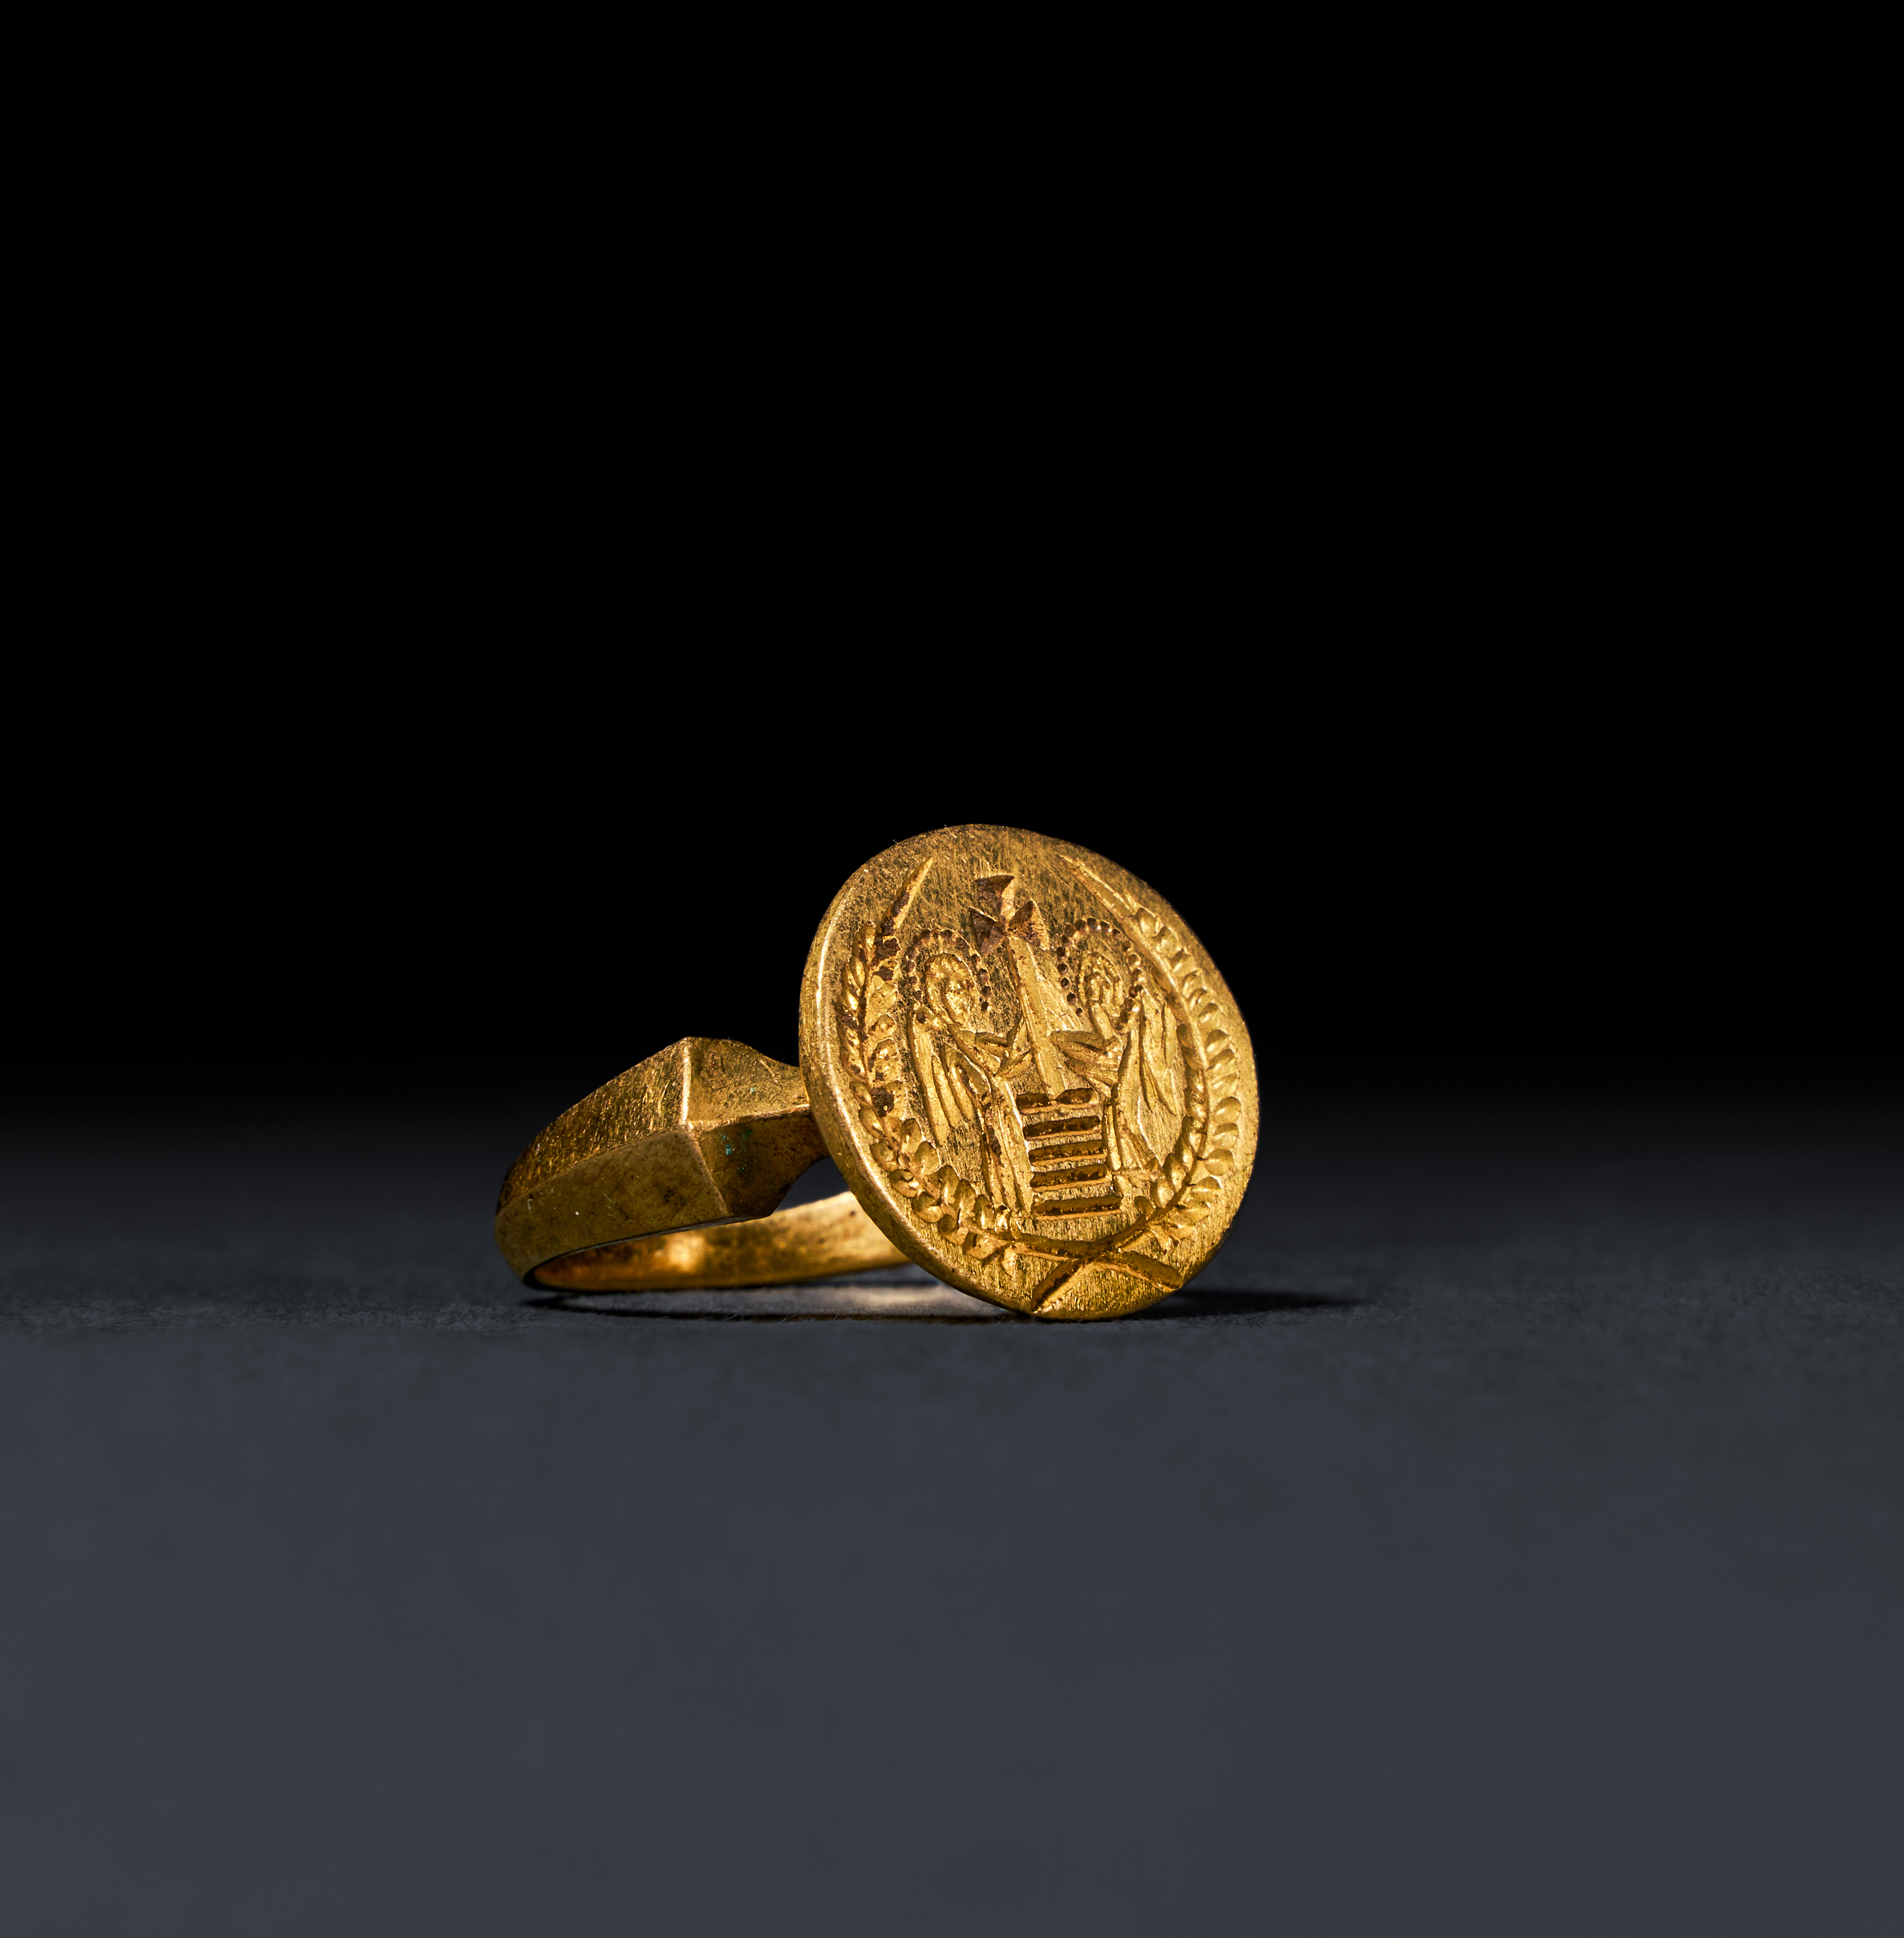 A BYZANTINE GOLD MARRIAGE FINGER RING CIRCA 6TH-7TH CENTURY A.D. - Image 2 of 2